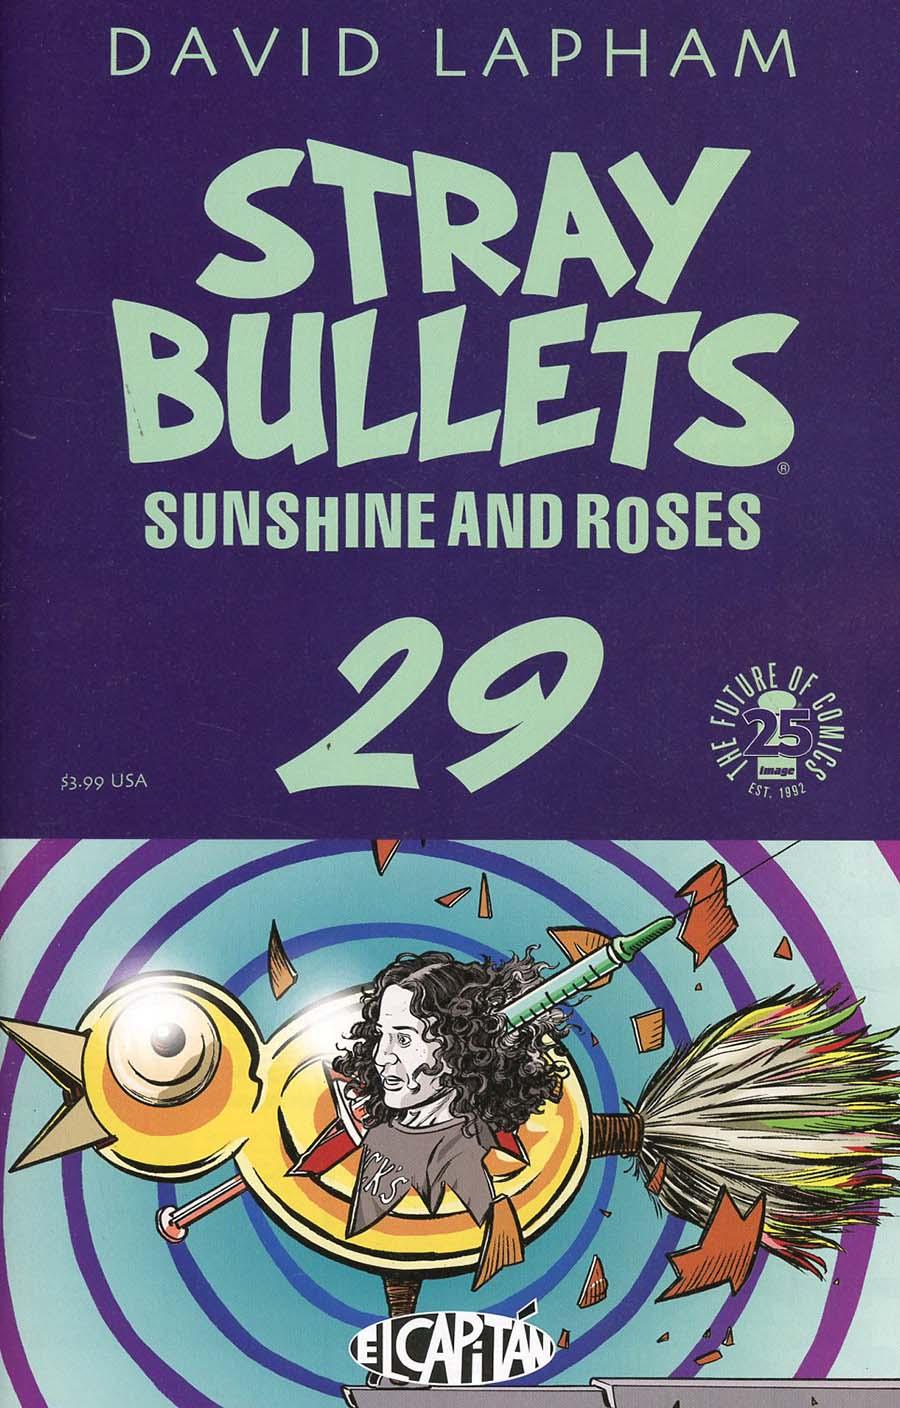 Stray Bullets Sunshine And Roses Vol. 1 #29